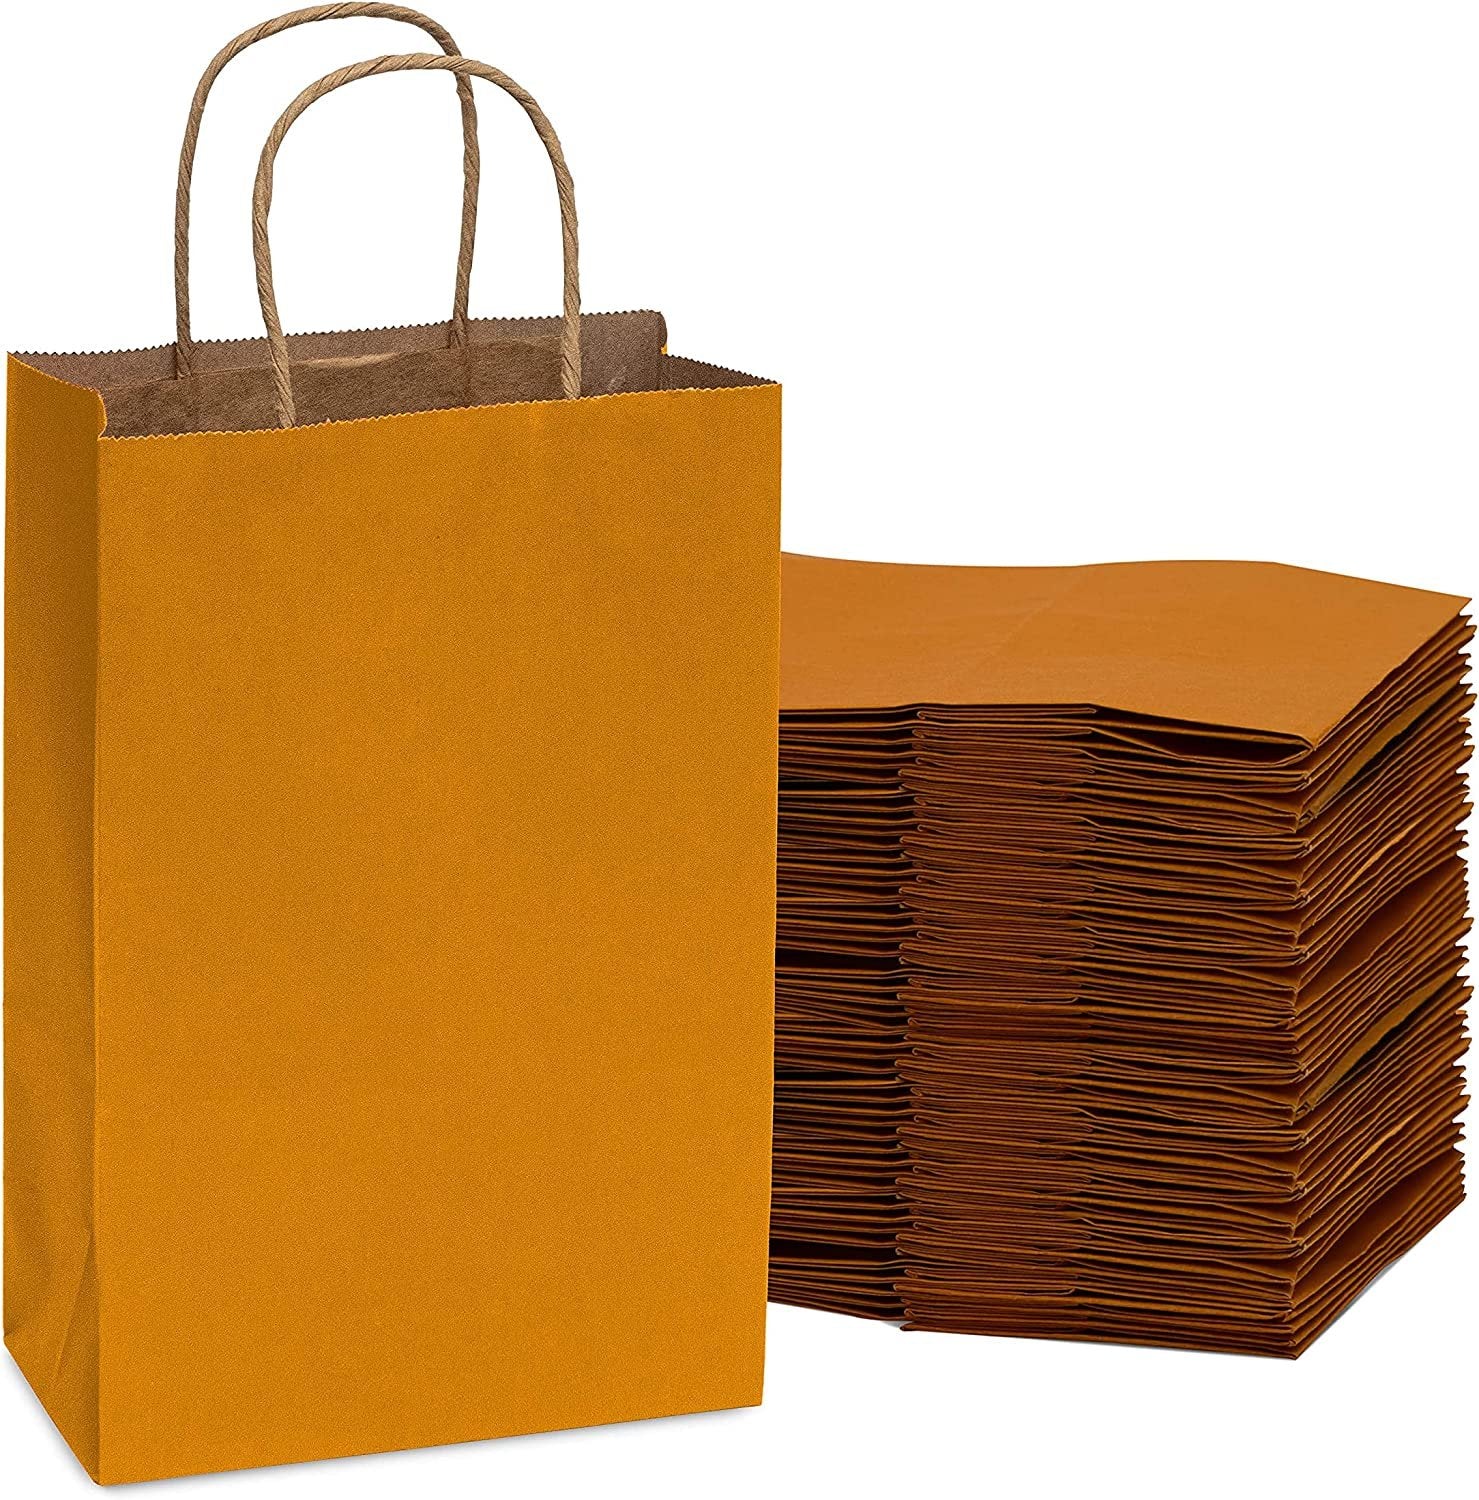 Orange Gift Bags - 6x3x9 Inch 50 Pack Kraft Paper Shopping Bags with Handles, Small Craft Totes in Bulk for Boutiques, Small Business, Retail Stores, Birthday Parties, Jewelry, Merchandise, Bulk